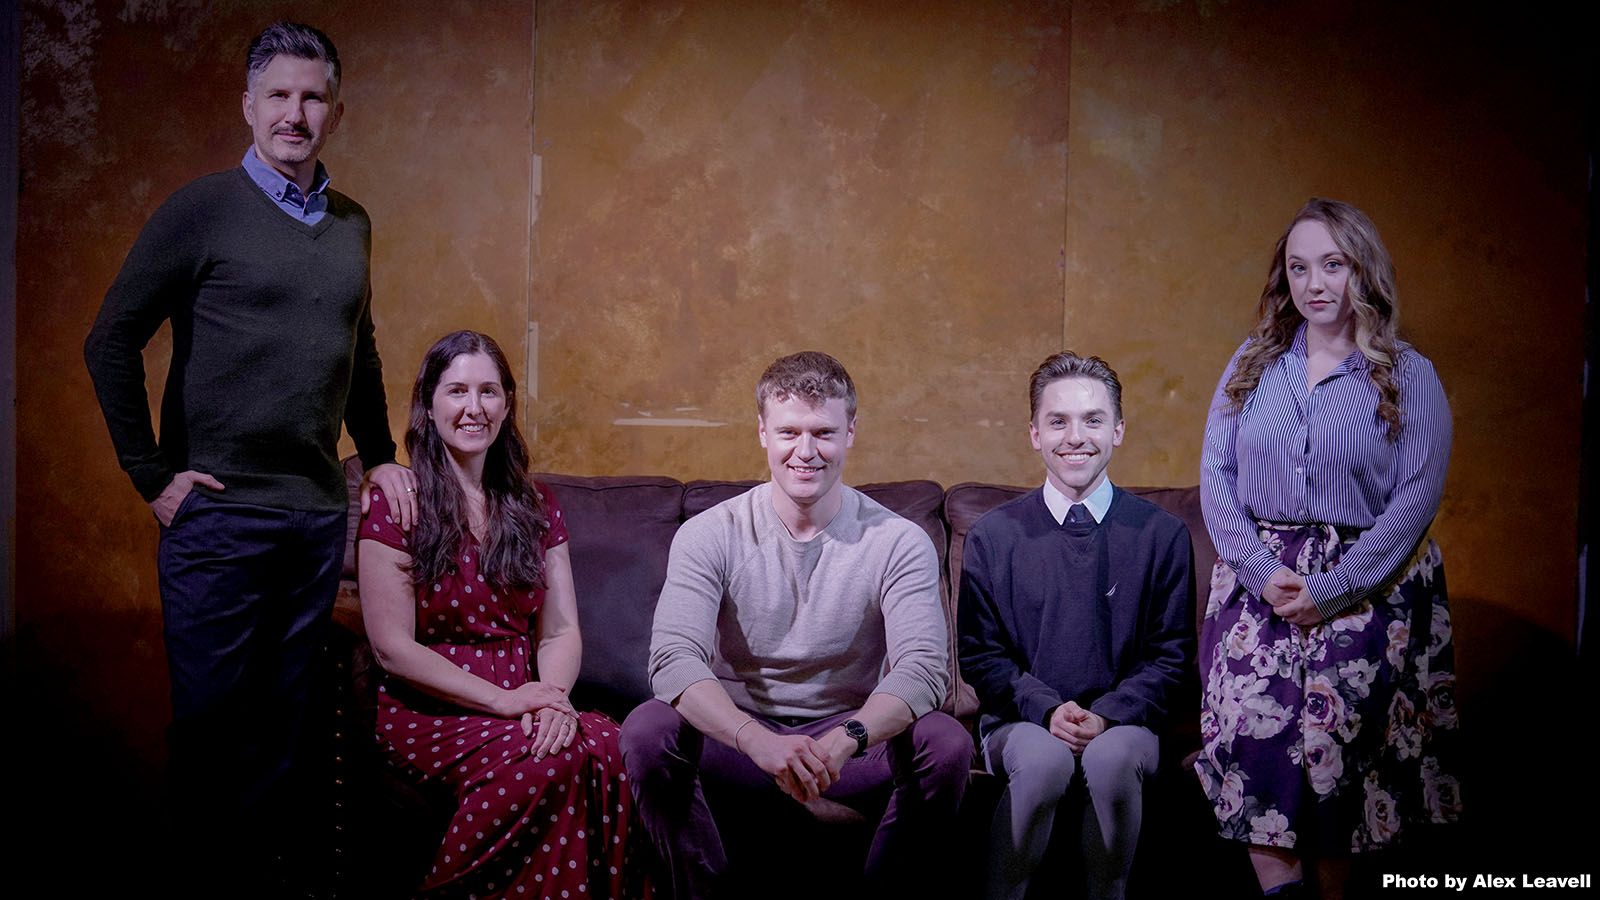 The cast of Indiana Musical Theatre Foundation’s upcoming production of The Longest Night, written by local playwright Darby LeClear, includes, from left, Stuart Hepler, Kat Hickey, Caleb Curtis, Lincoln Everetts, and Chloe Price.